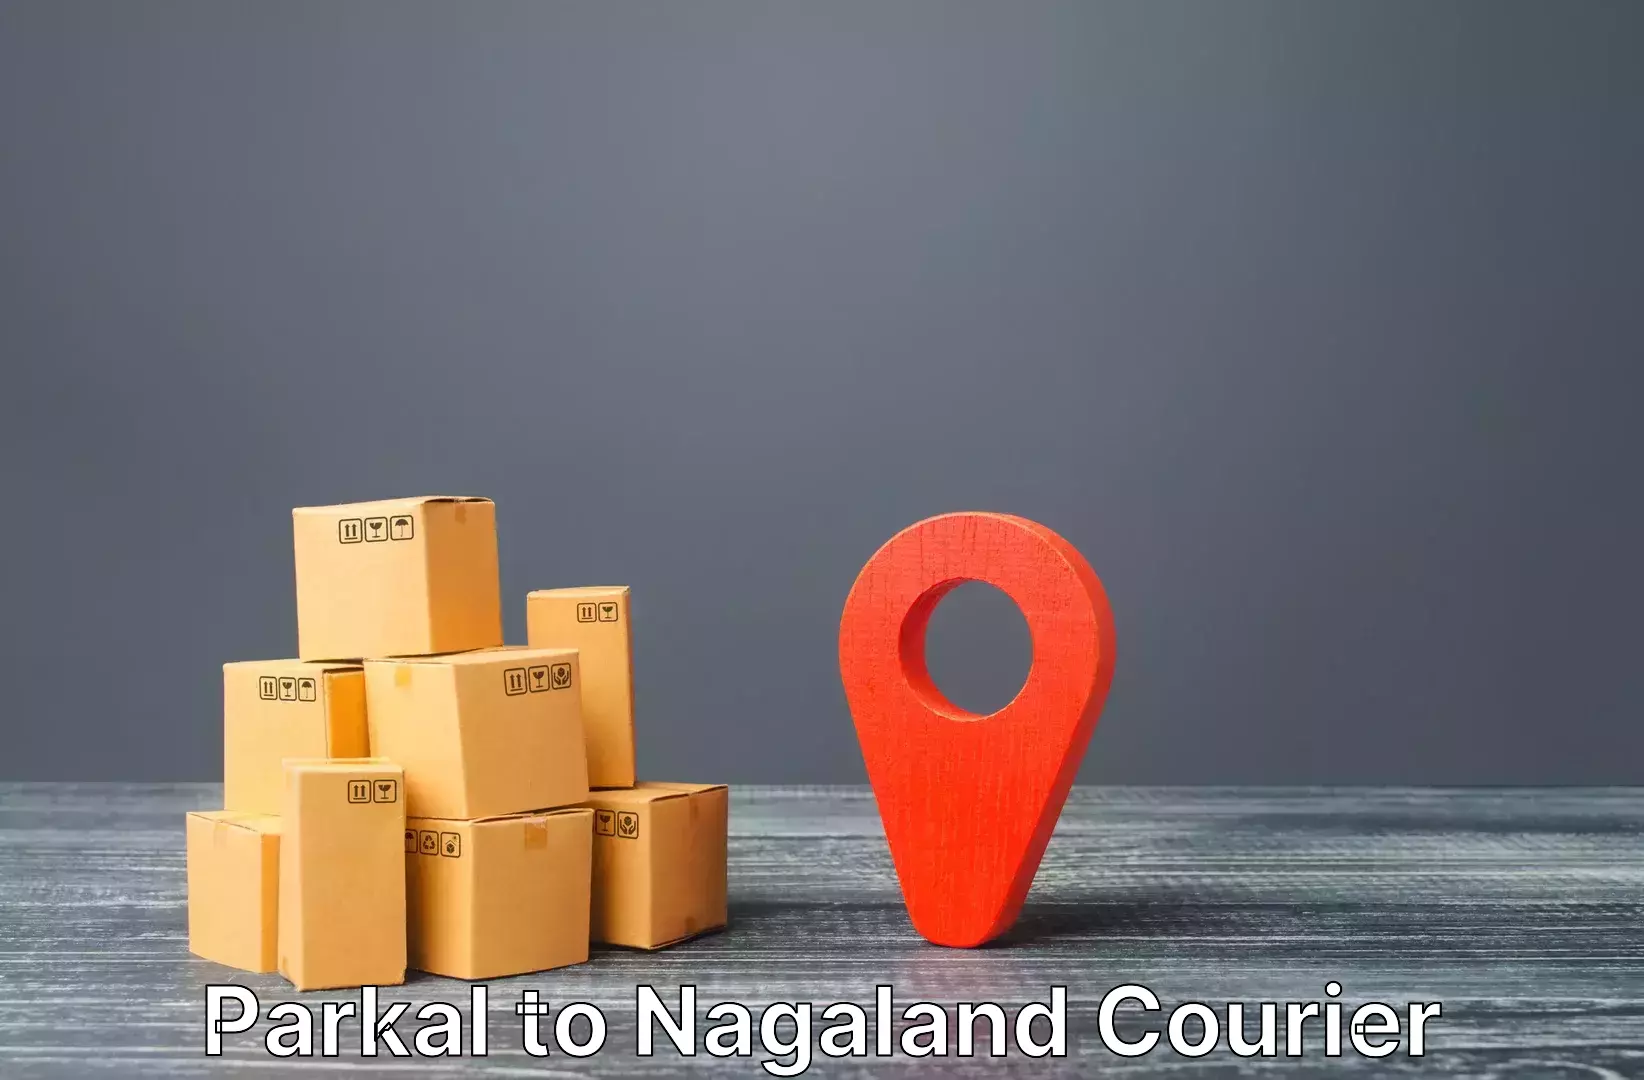 Business luggage transport in Parkal to Nagaland